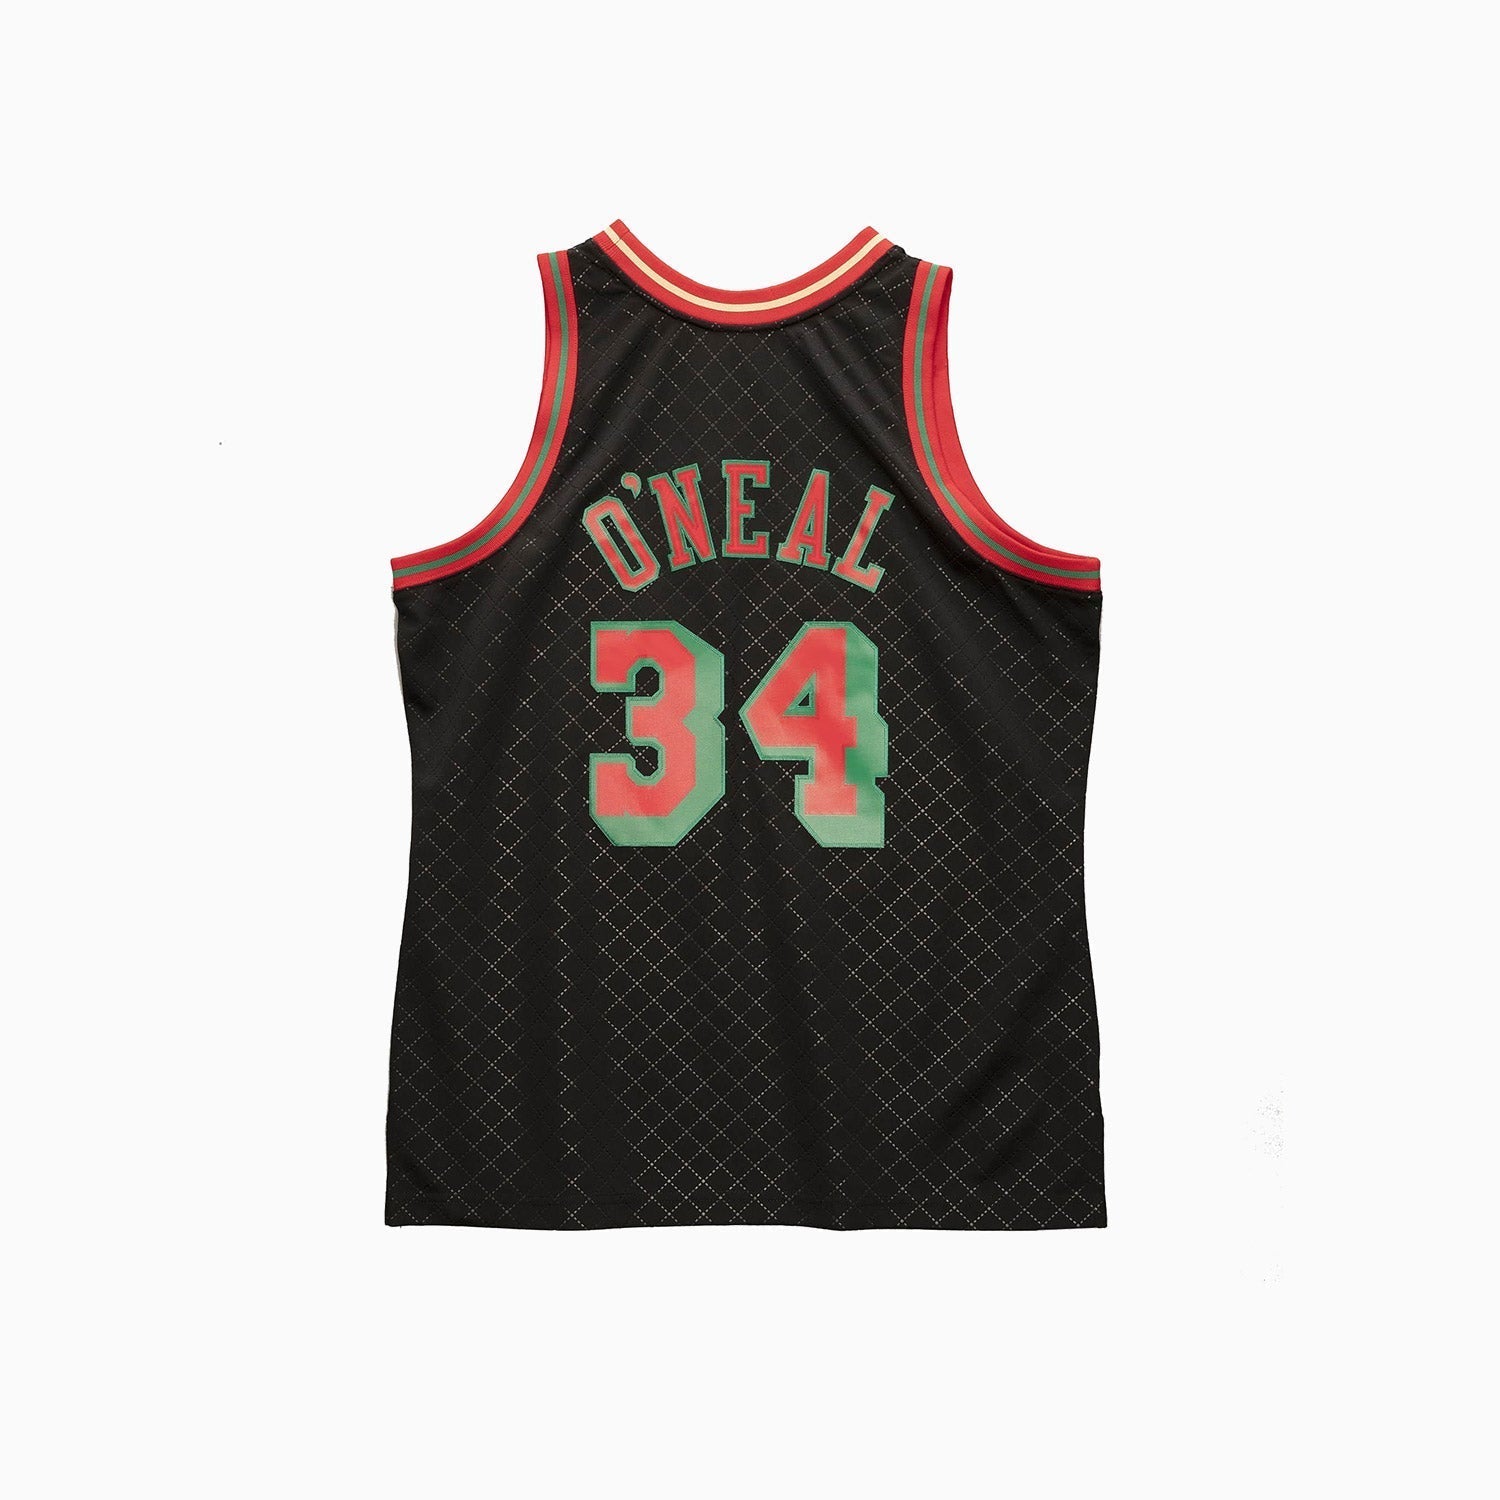 mitchell-and-ness-swingman-shaquille-oneal-los-angeles-lakers-neapolitan-nba-1996-97-jersey-smjylf9096-lalblck96son